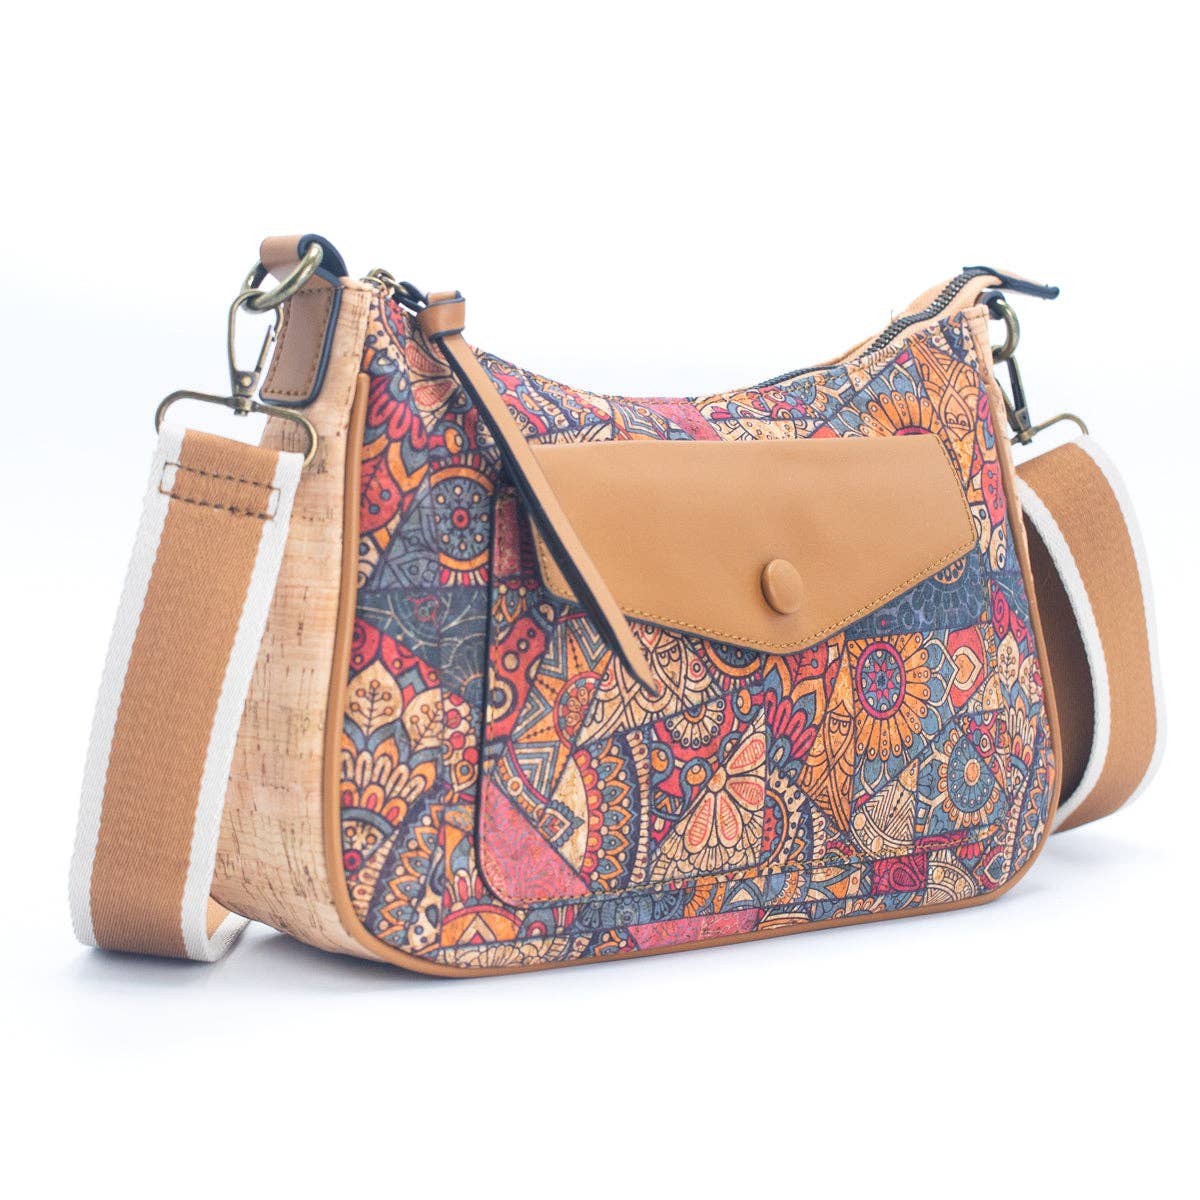 Natural Cork Printed Pattern Women's Messenger Bag | THE CORK COLLECTION